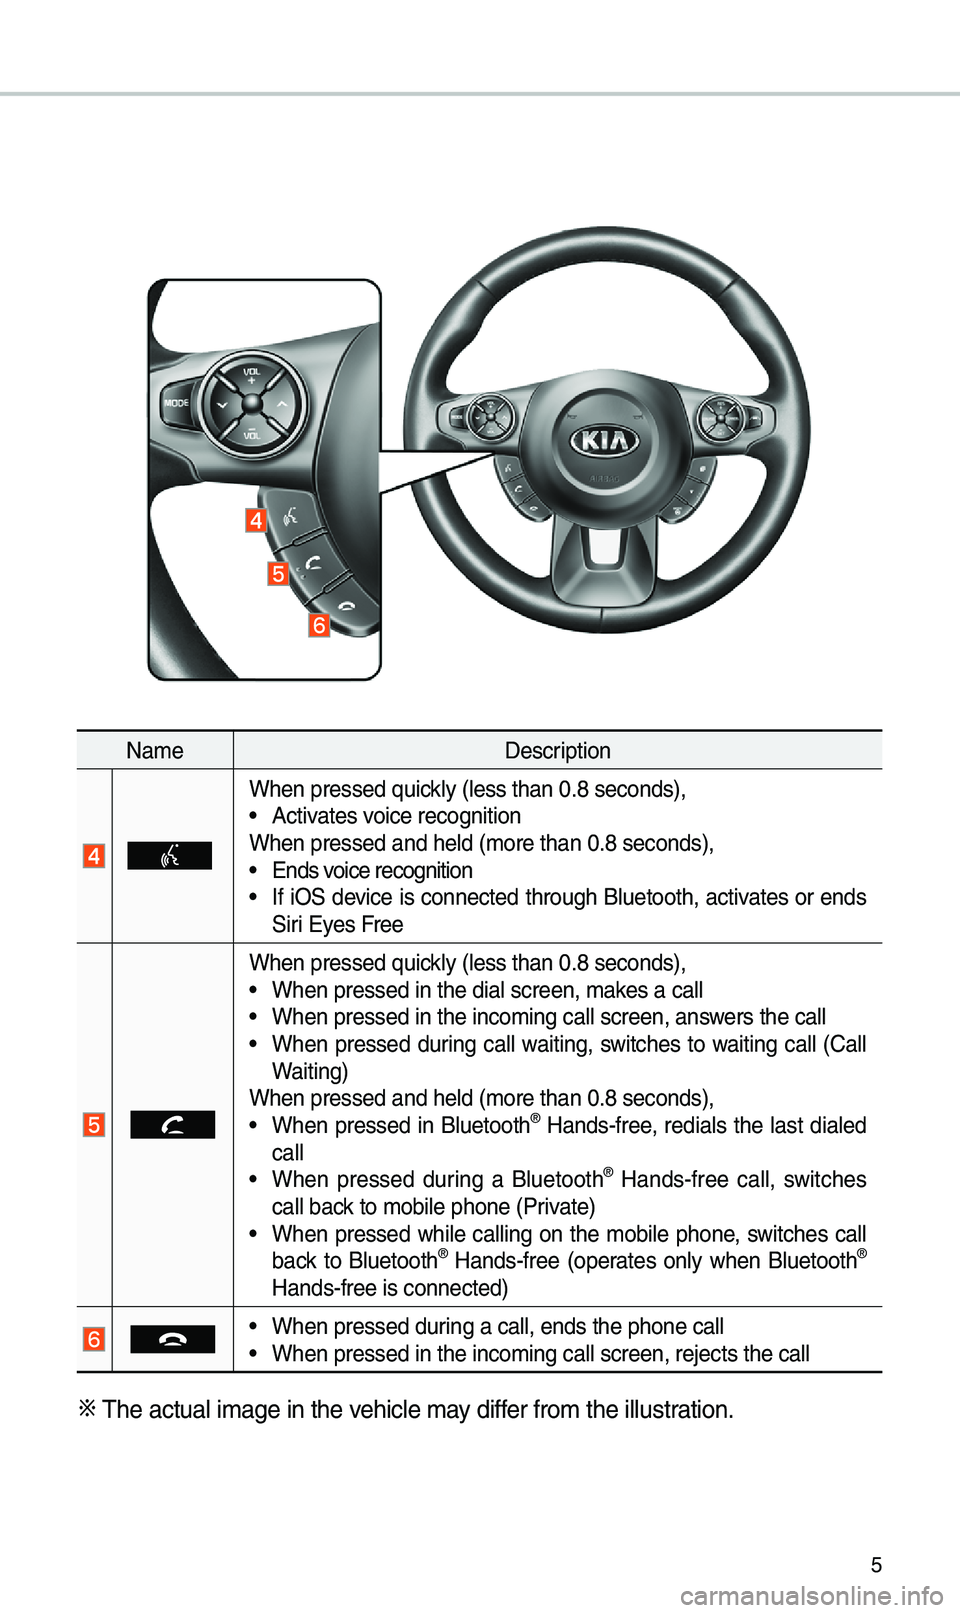 KIA SOUL 2019  Quick Reference Guide 5
Na\feDescription
When pressed quick\by (\bess than 0.8 \useconds),• Activates voice recognition
When pressed and h\ue\bd (\fore than 0.8 \useconds),
• Ends voice recognition• If iOS device is 